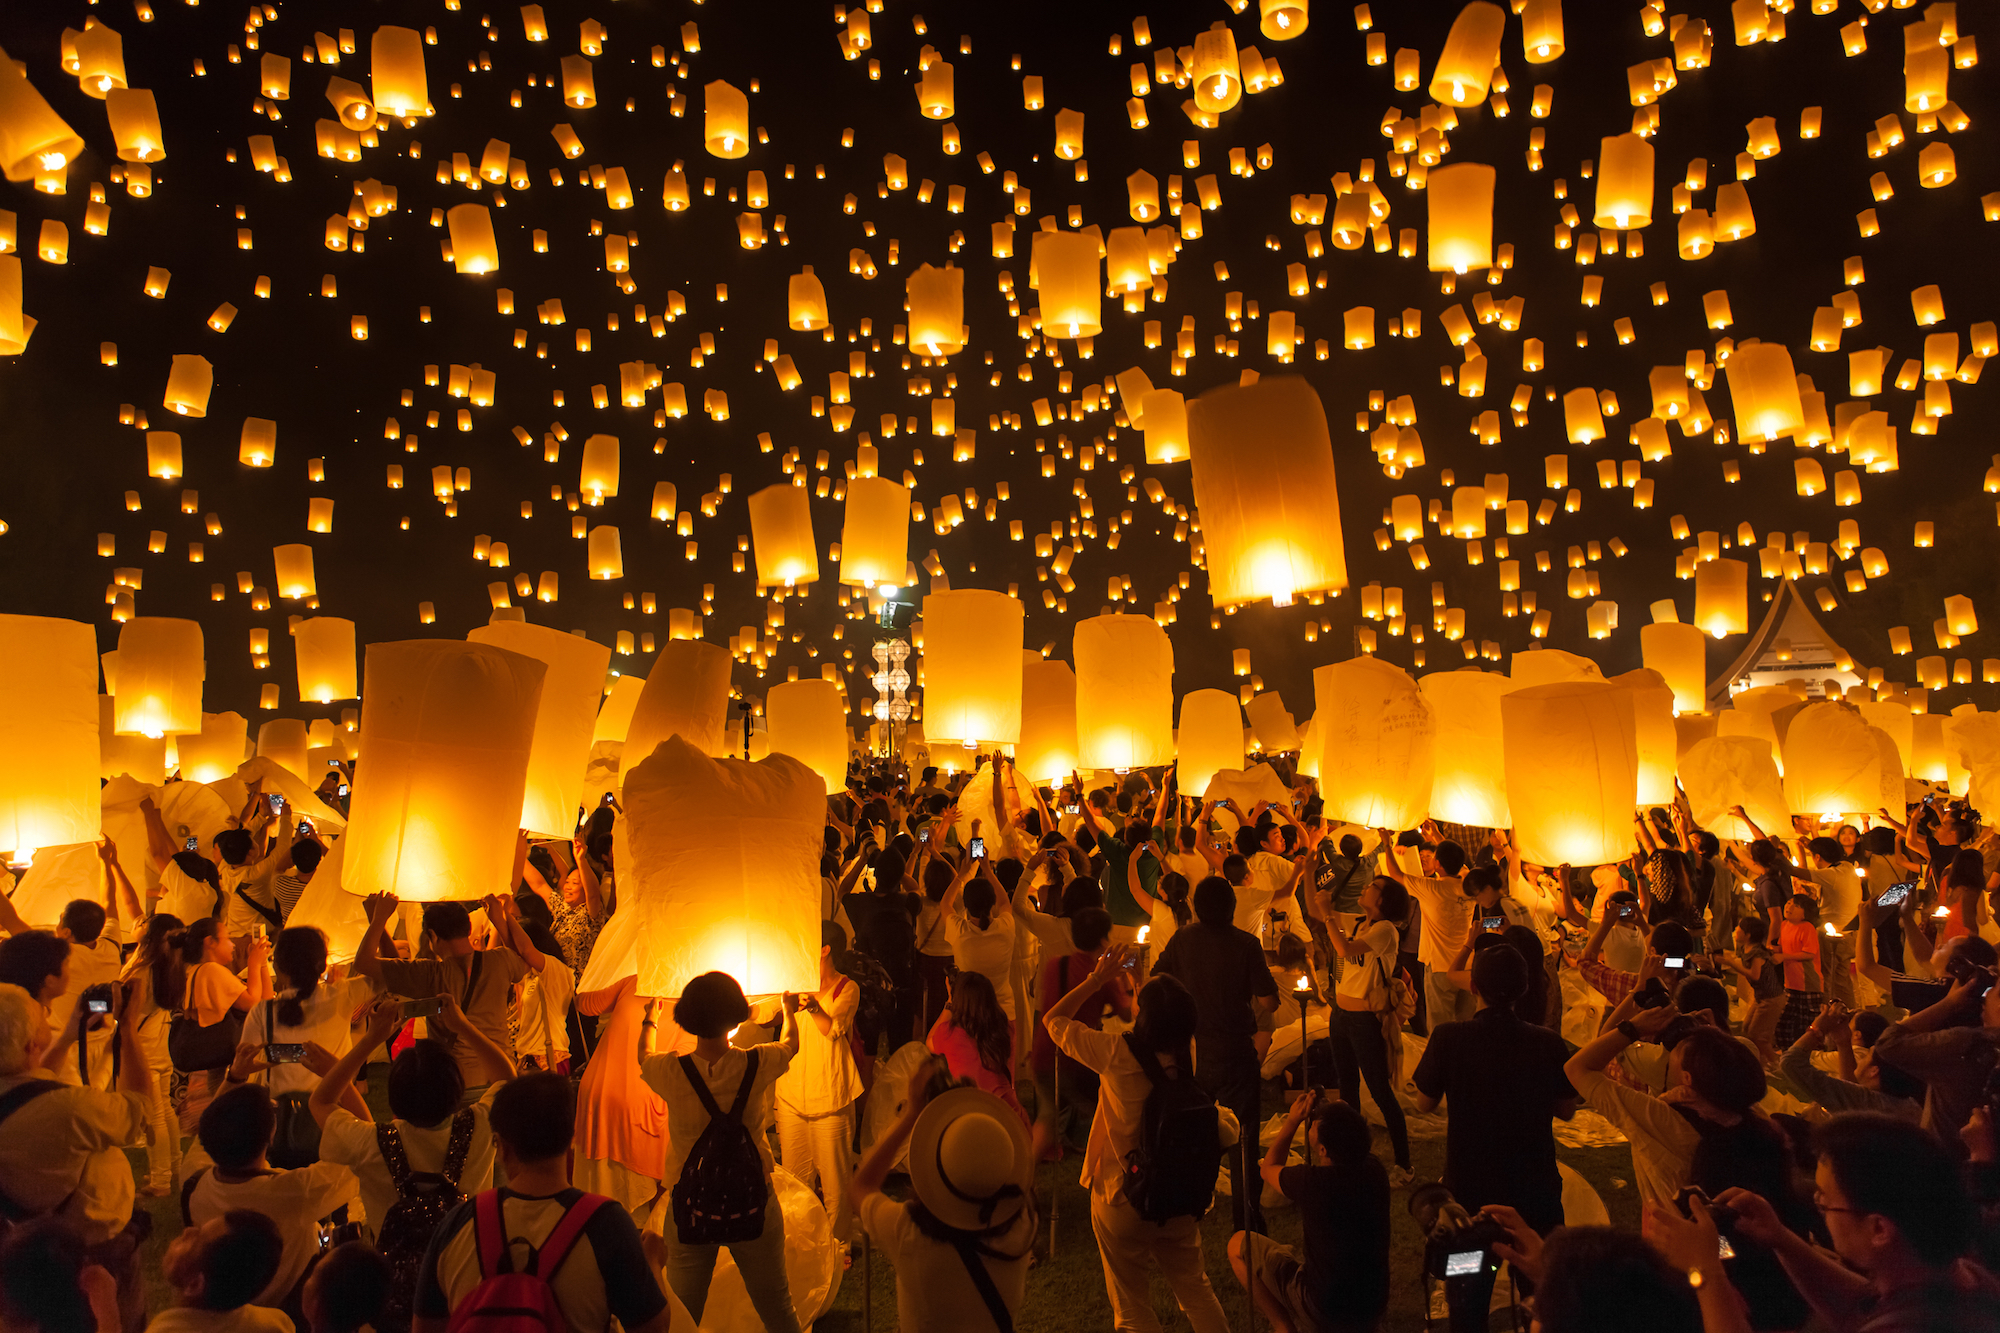 where can i buy chinese lanterns near me